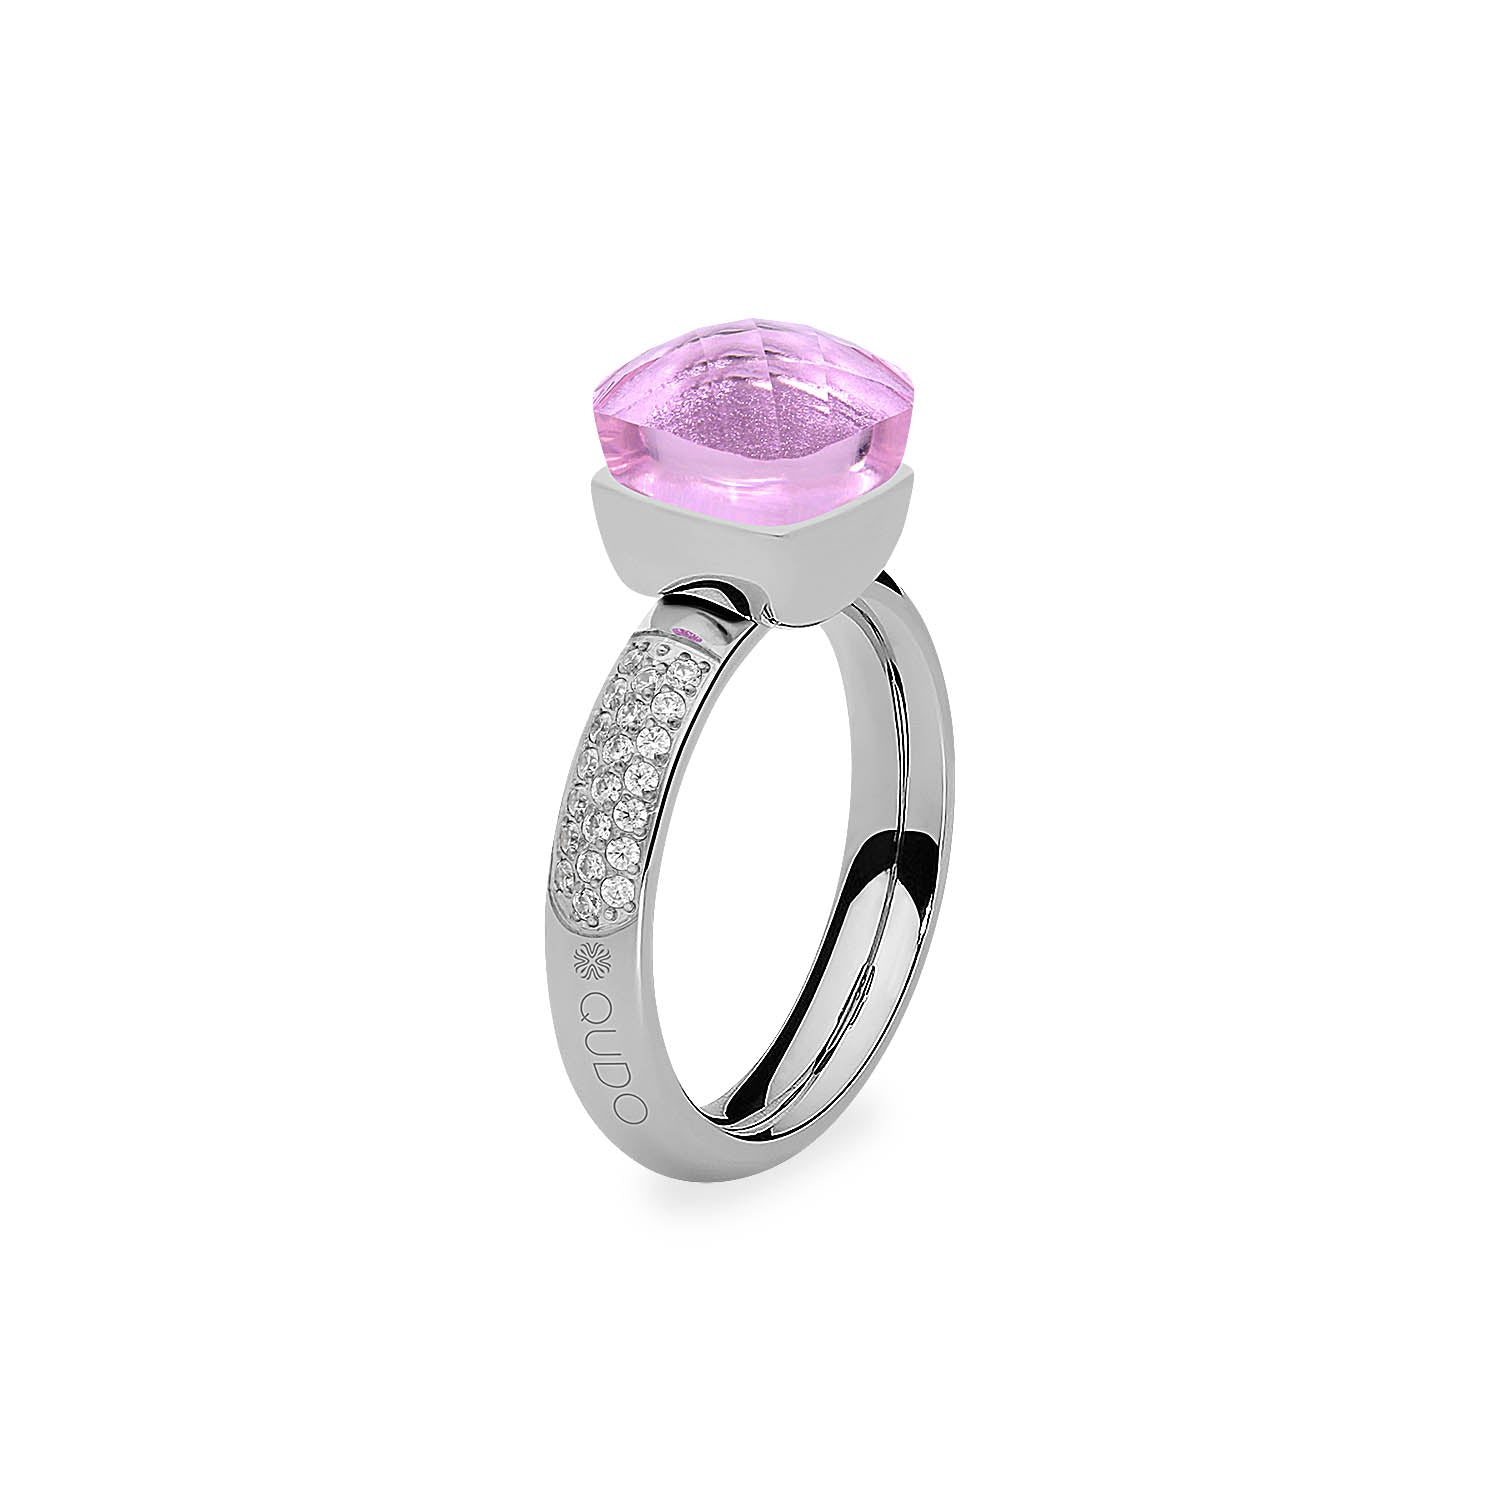 Firenze Deluxe Ring - Shades of Red & Purple - Silber